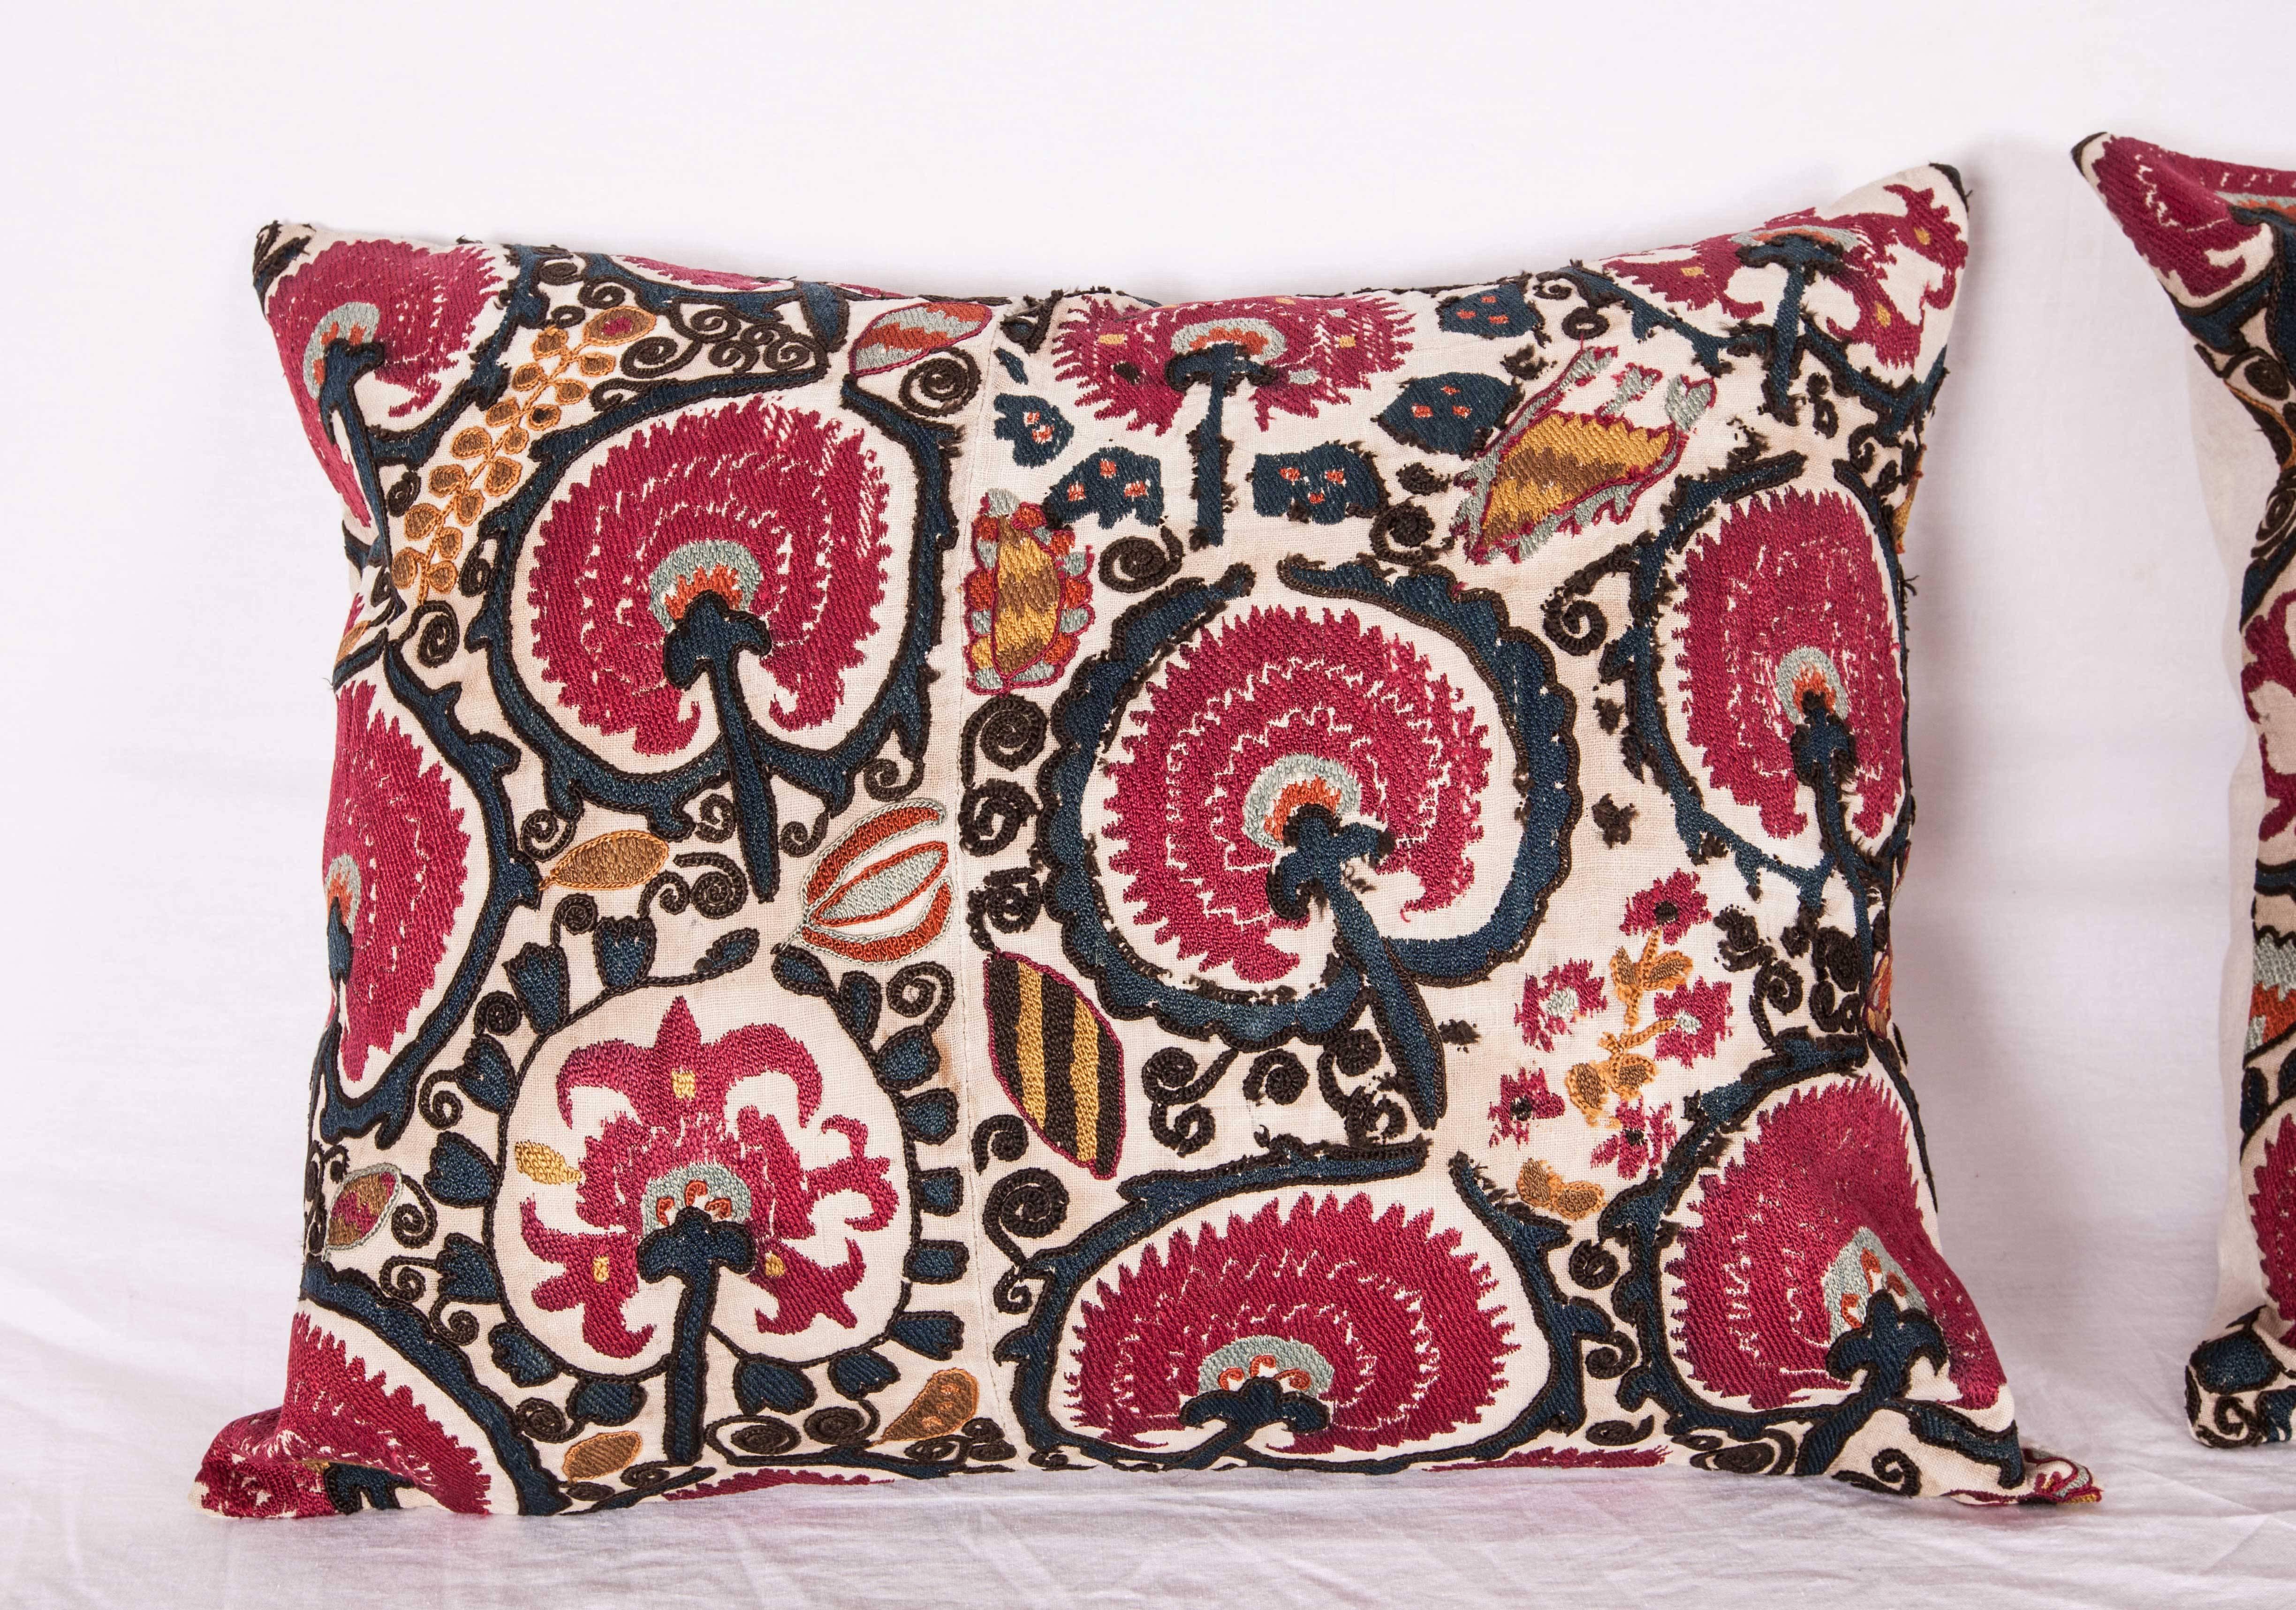 The pillow cases made from an antique Tajil Suzani from Ura Tube. It is silk embroidery on a handwoven cotton field.
The backing is pure linen, and they do not come with inserts but bags made to the size in cotton to accommodate insert